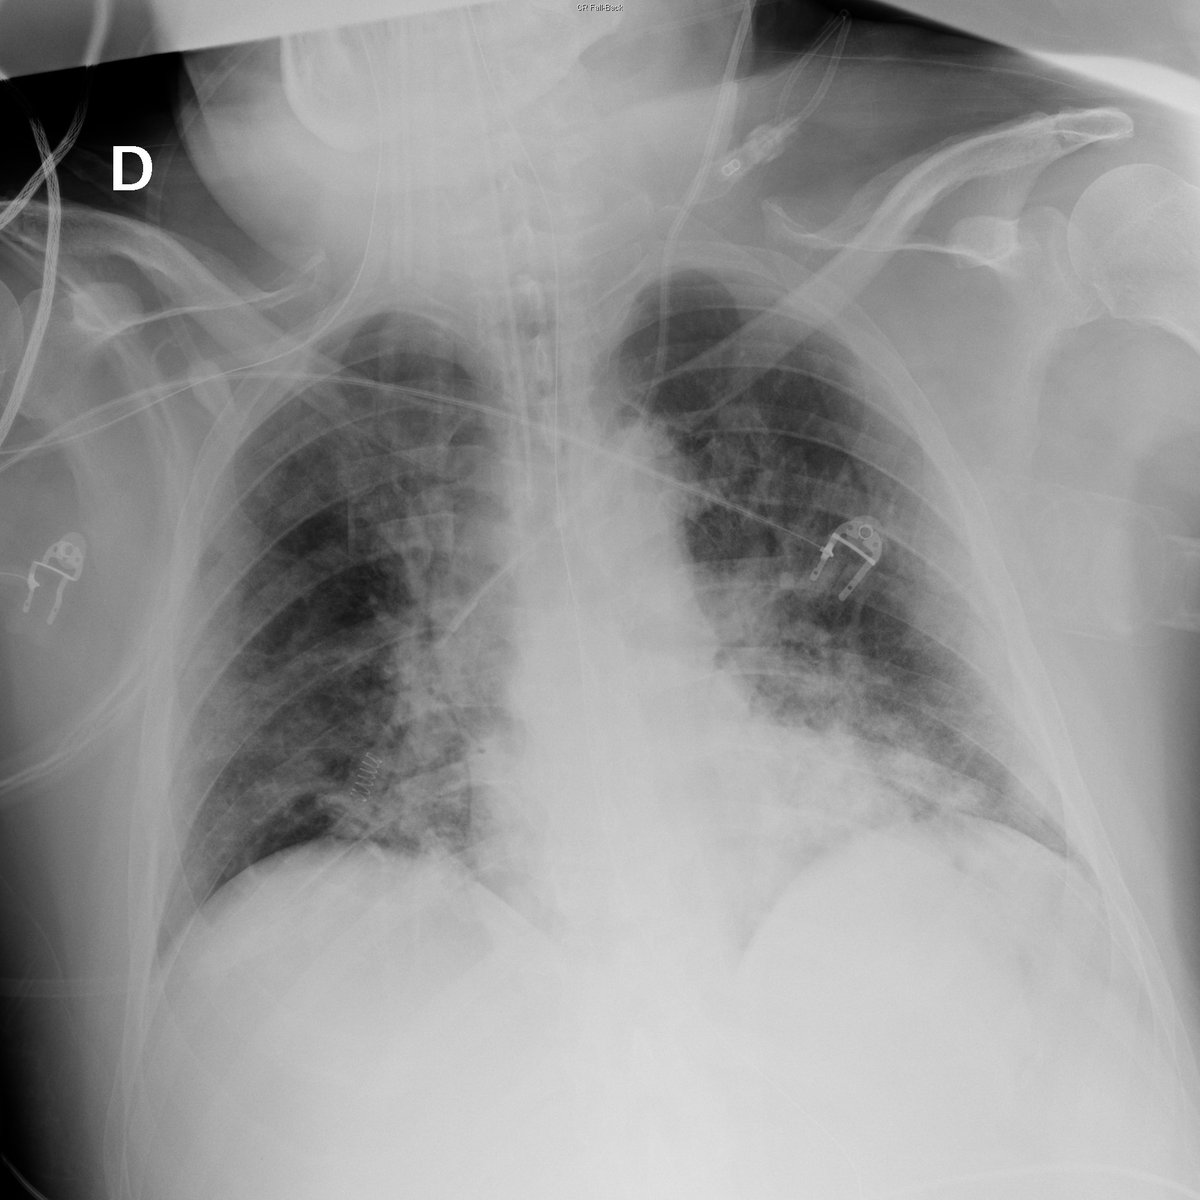 Case 47. 54yo male. Cough and fever. Day 1, 5 (acute respiratory failure), 7 and 9. Small peripheral opacities with progresion toward extensive bilateral consolidation.